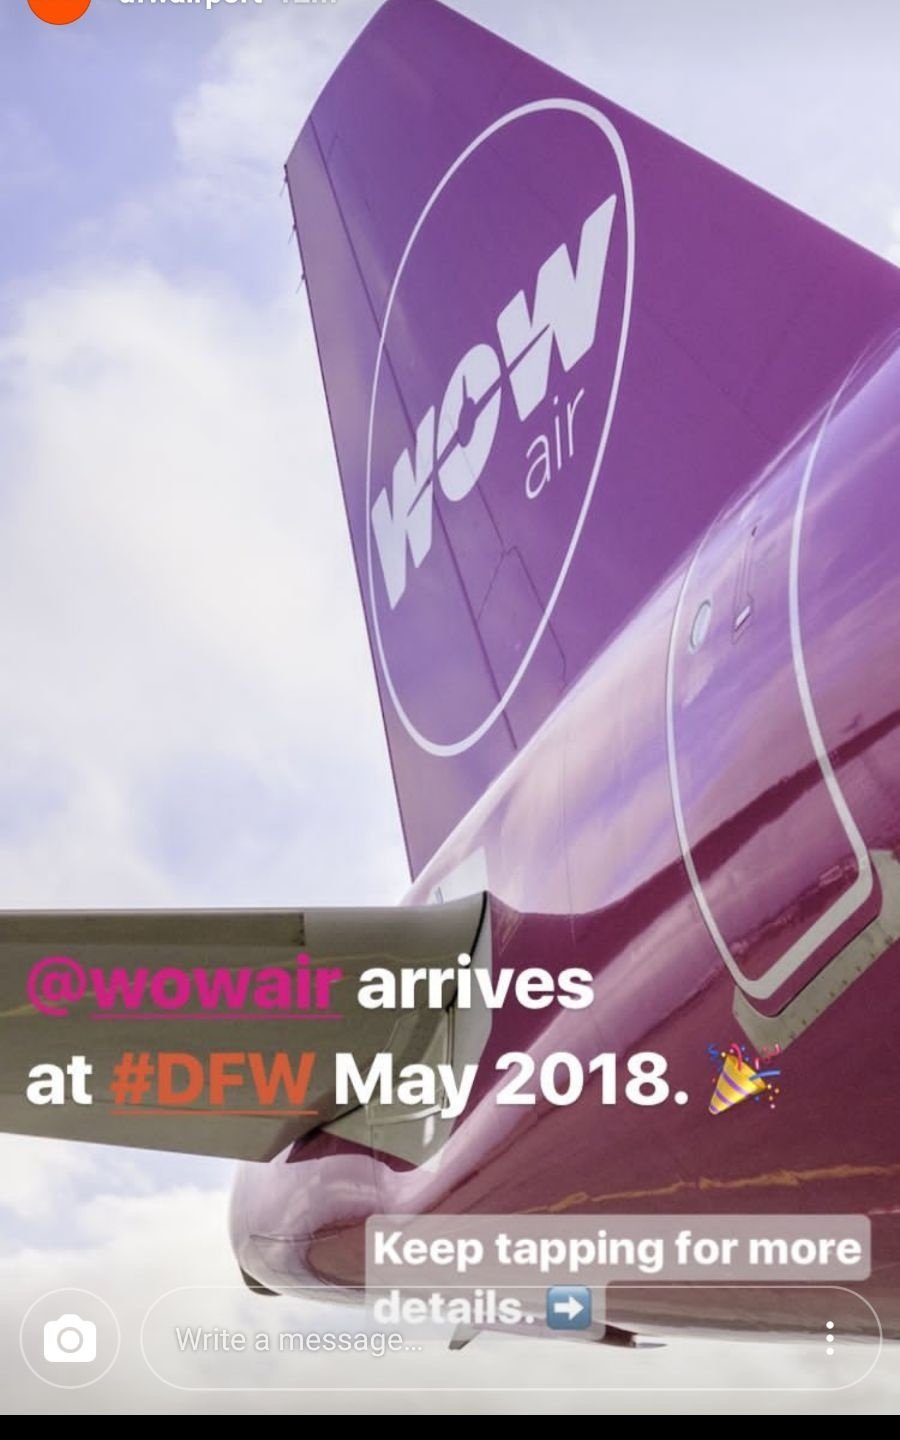 WOW Air Comes to DFW!